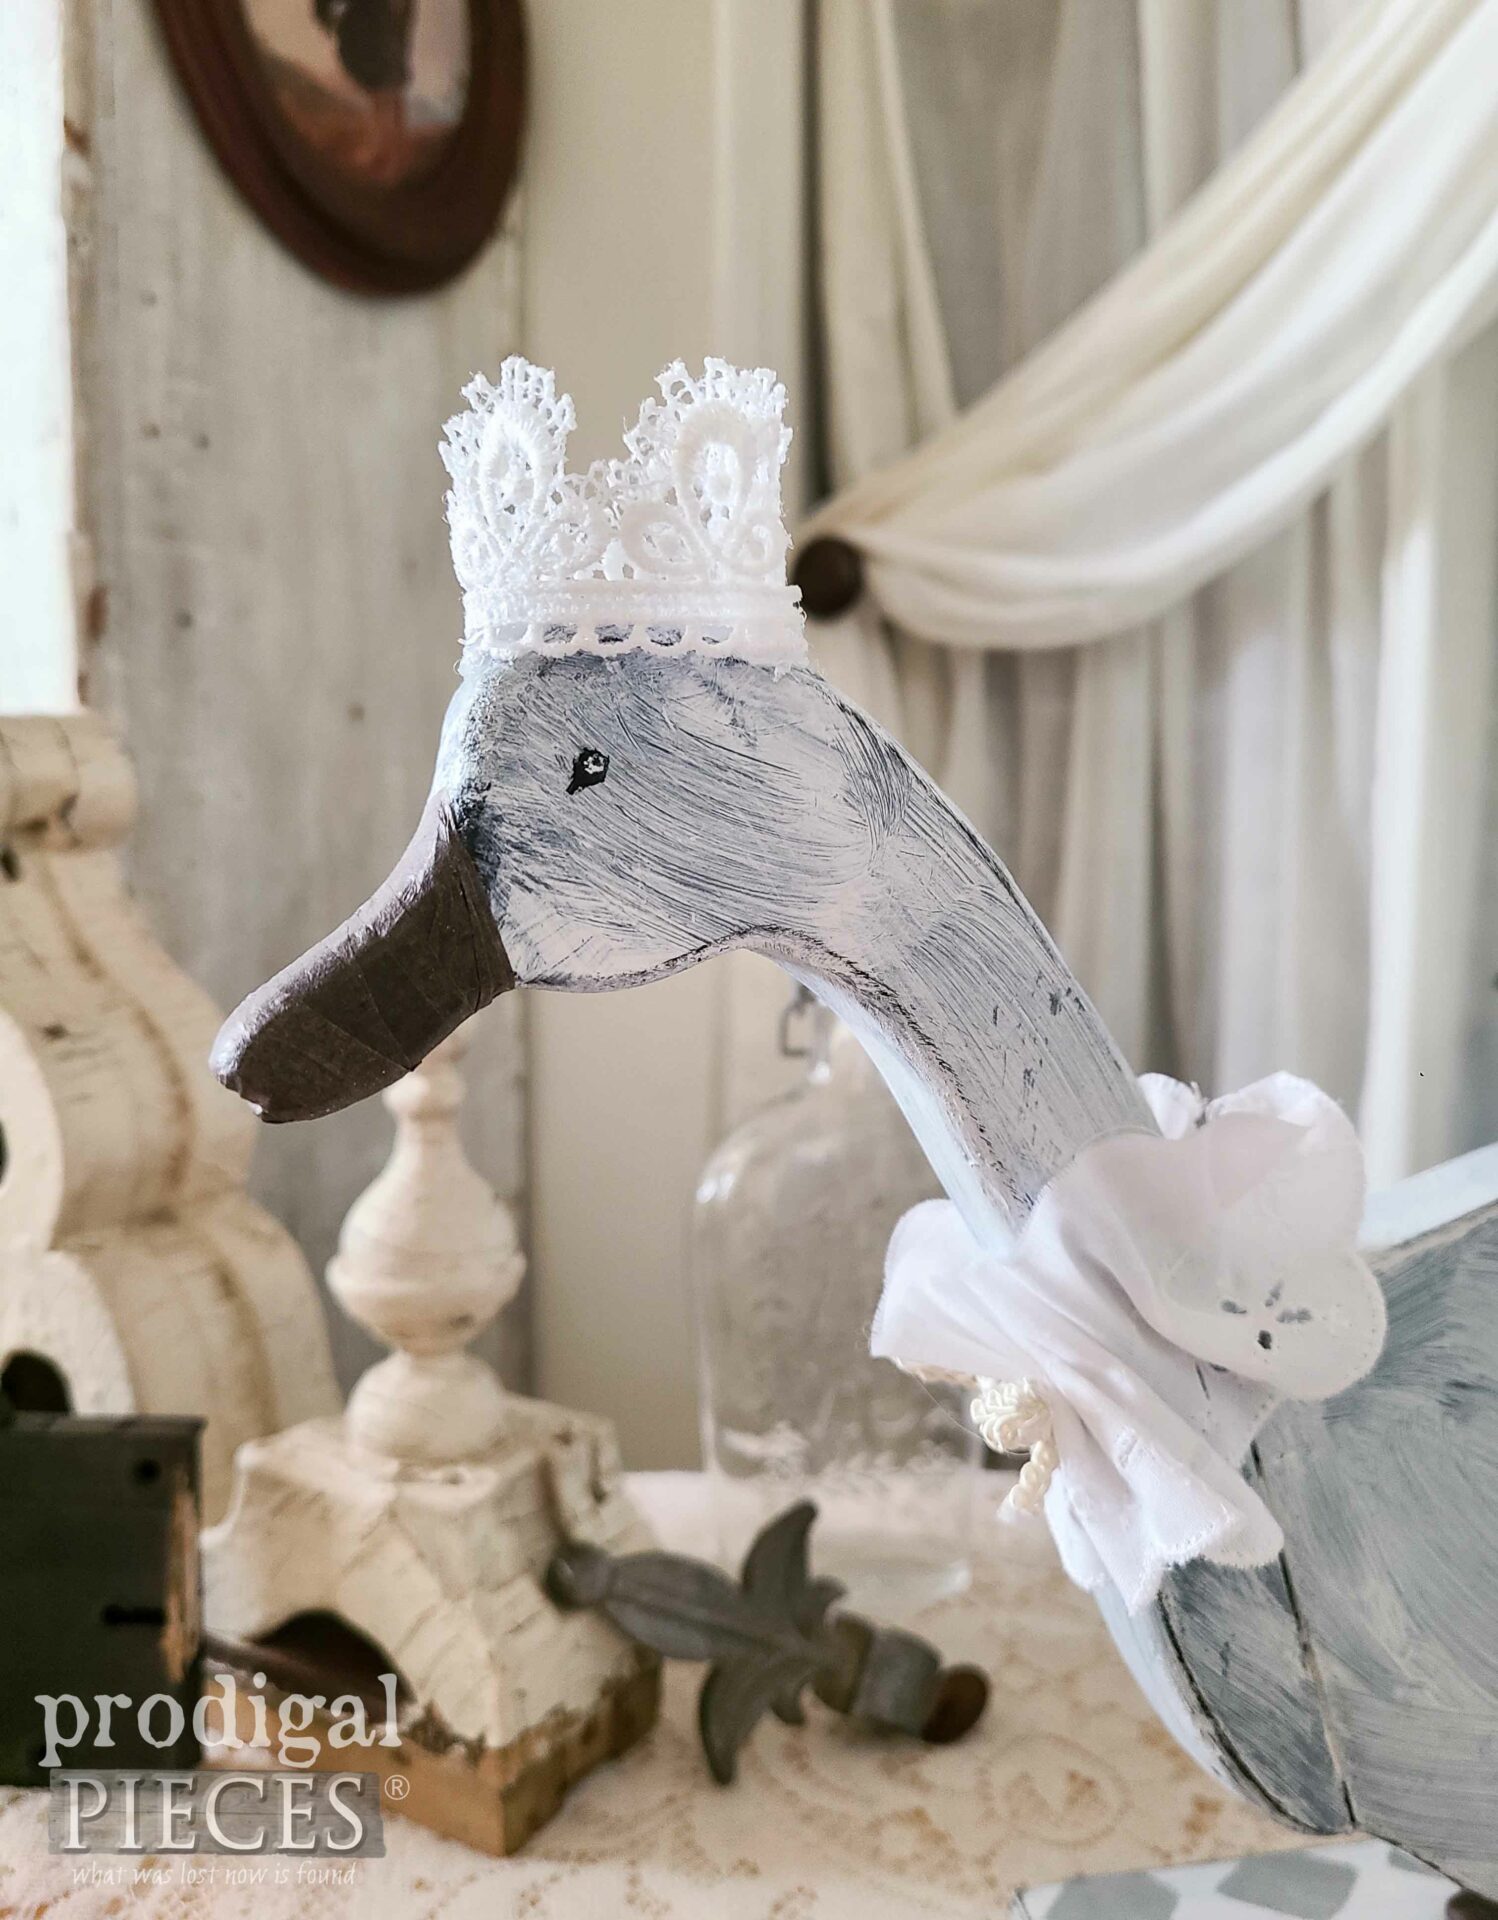 Handmade Shabby Chic Goose with Lace Crown by Larissa of Prodigal Pieces | prodigalpieces.com #prodigalpieces #art #sculpture